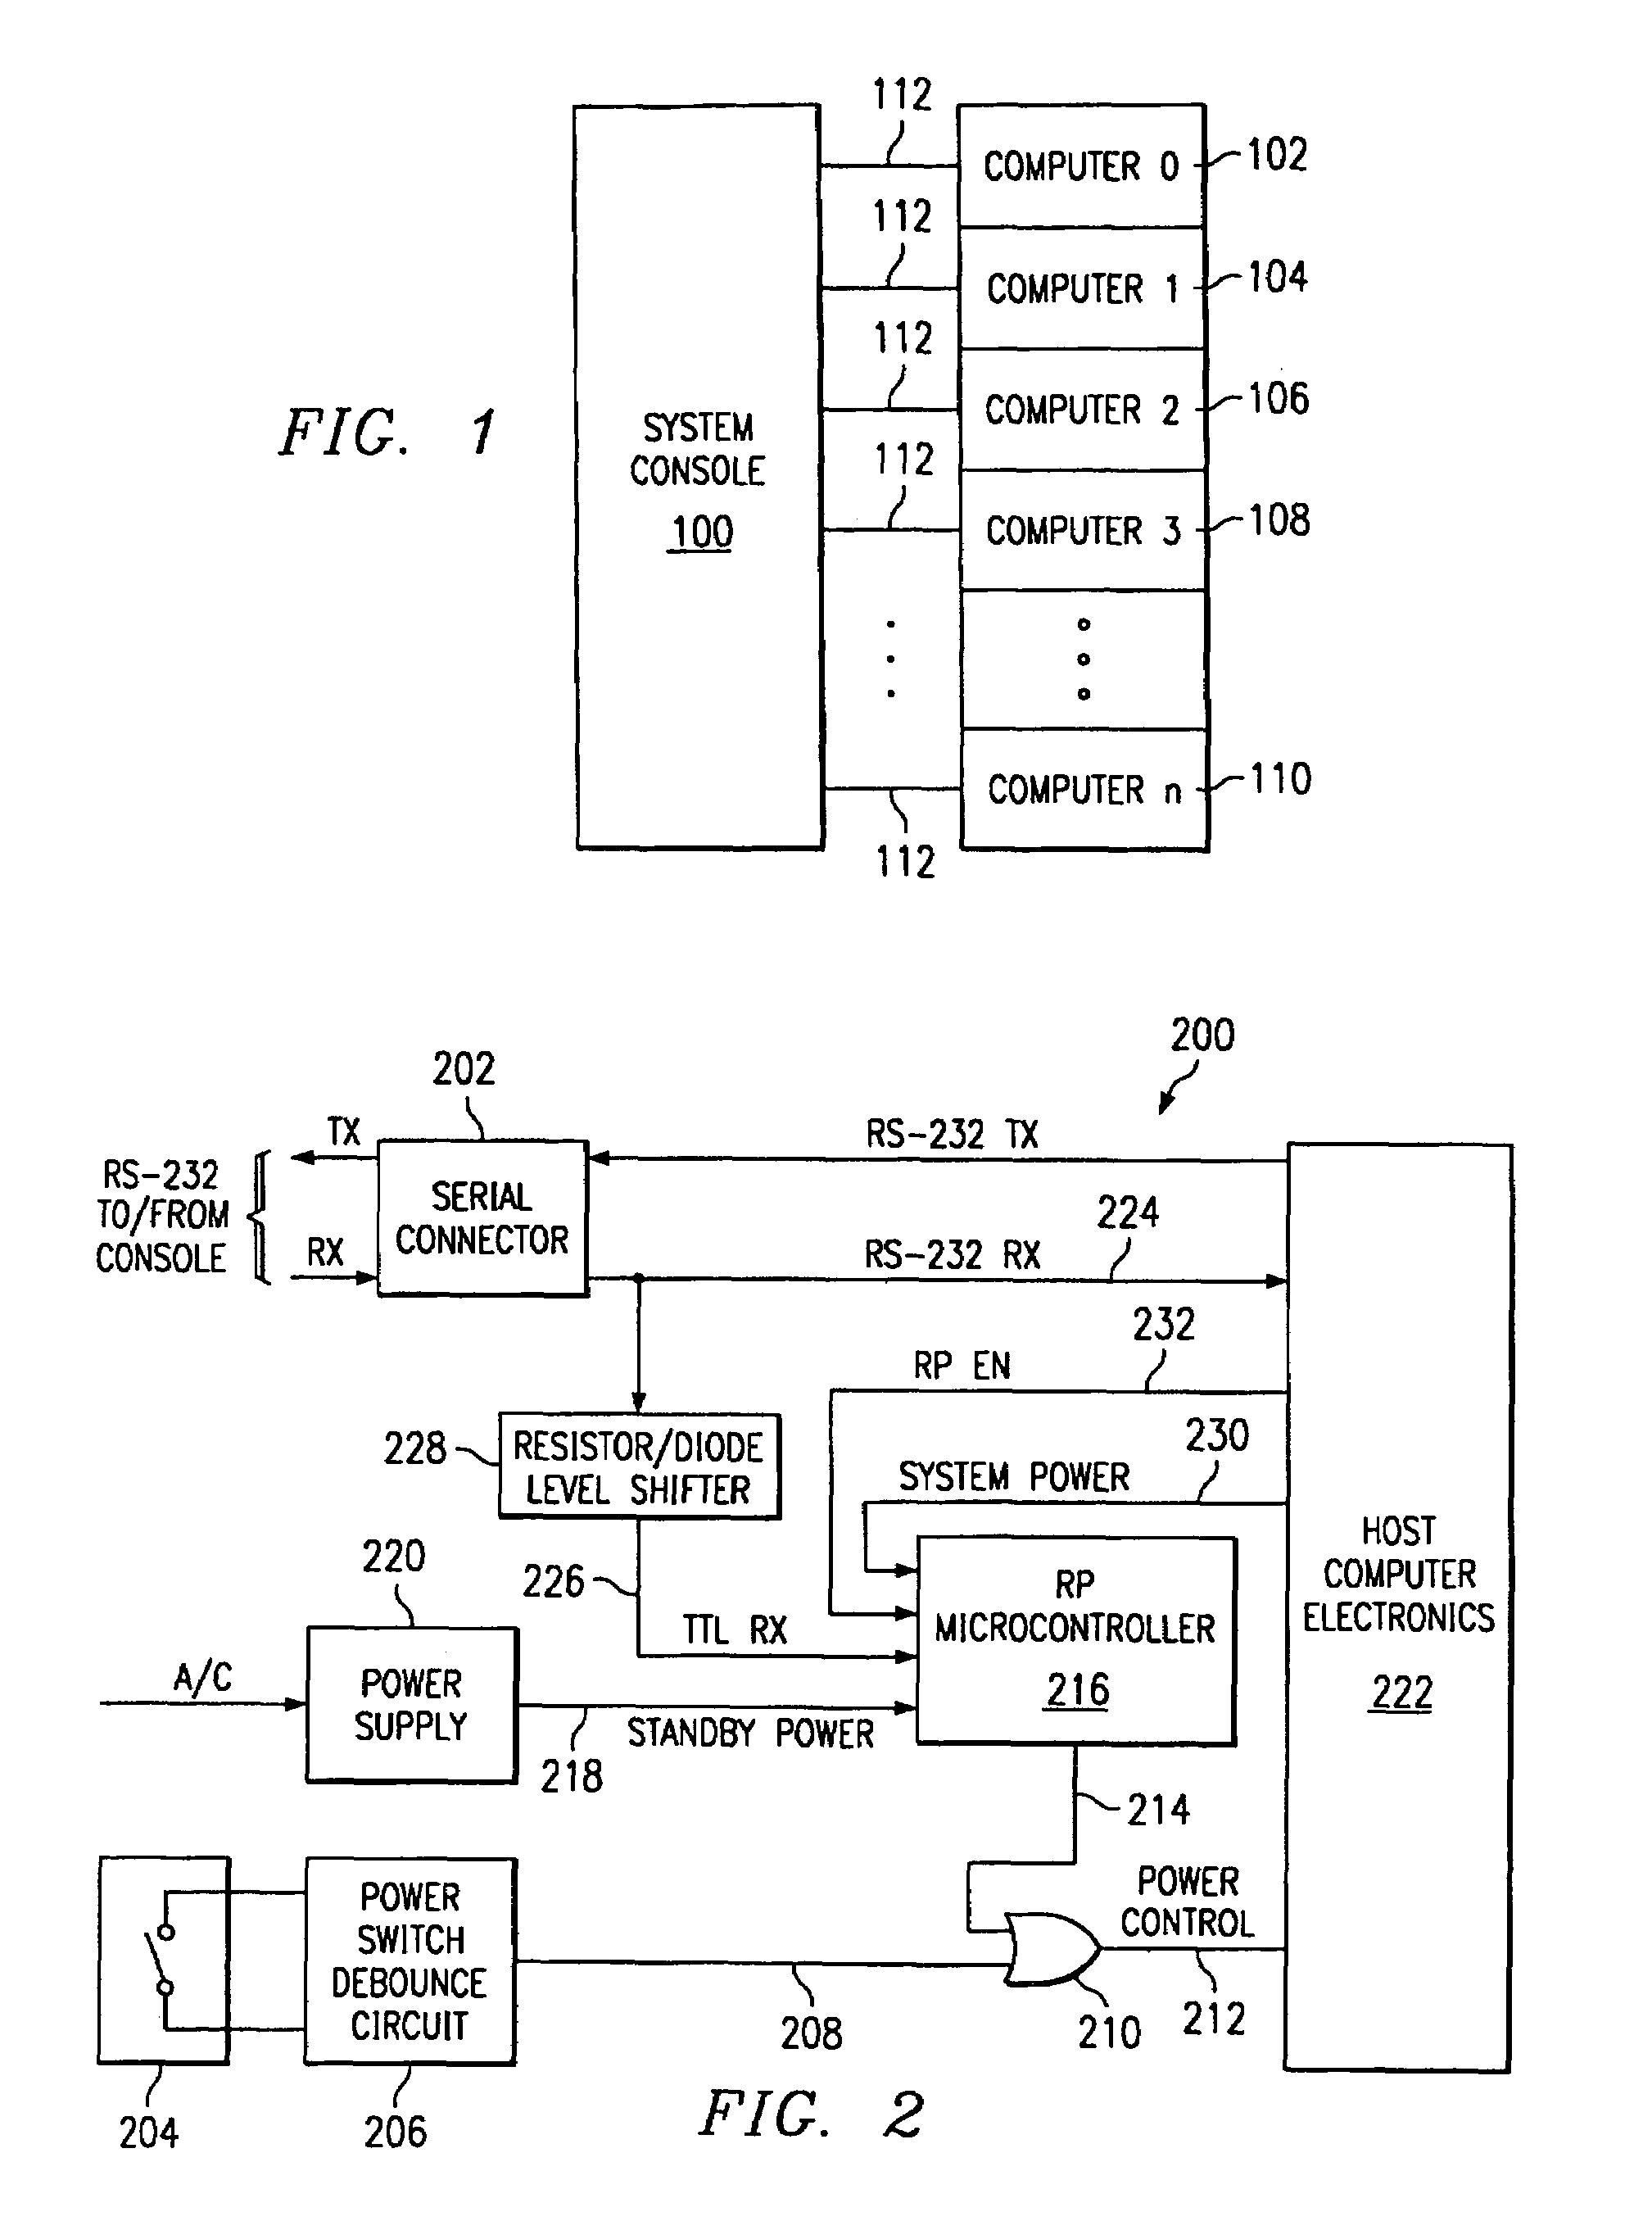 Method and apparatus for secure remote control of power-on state for computers